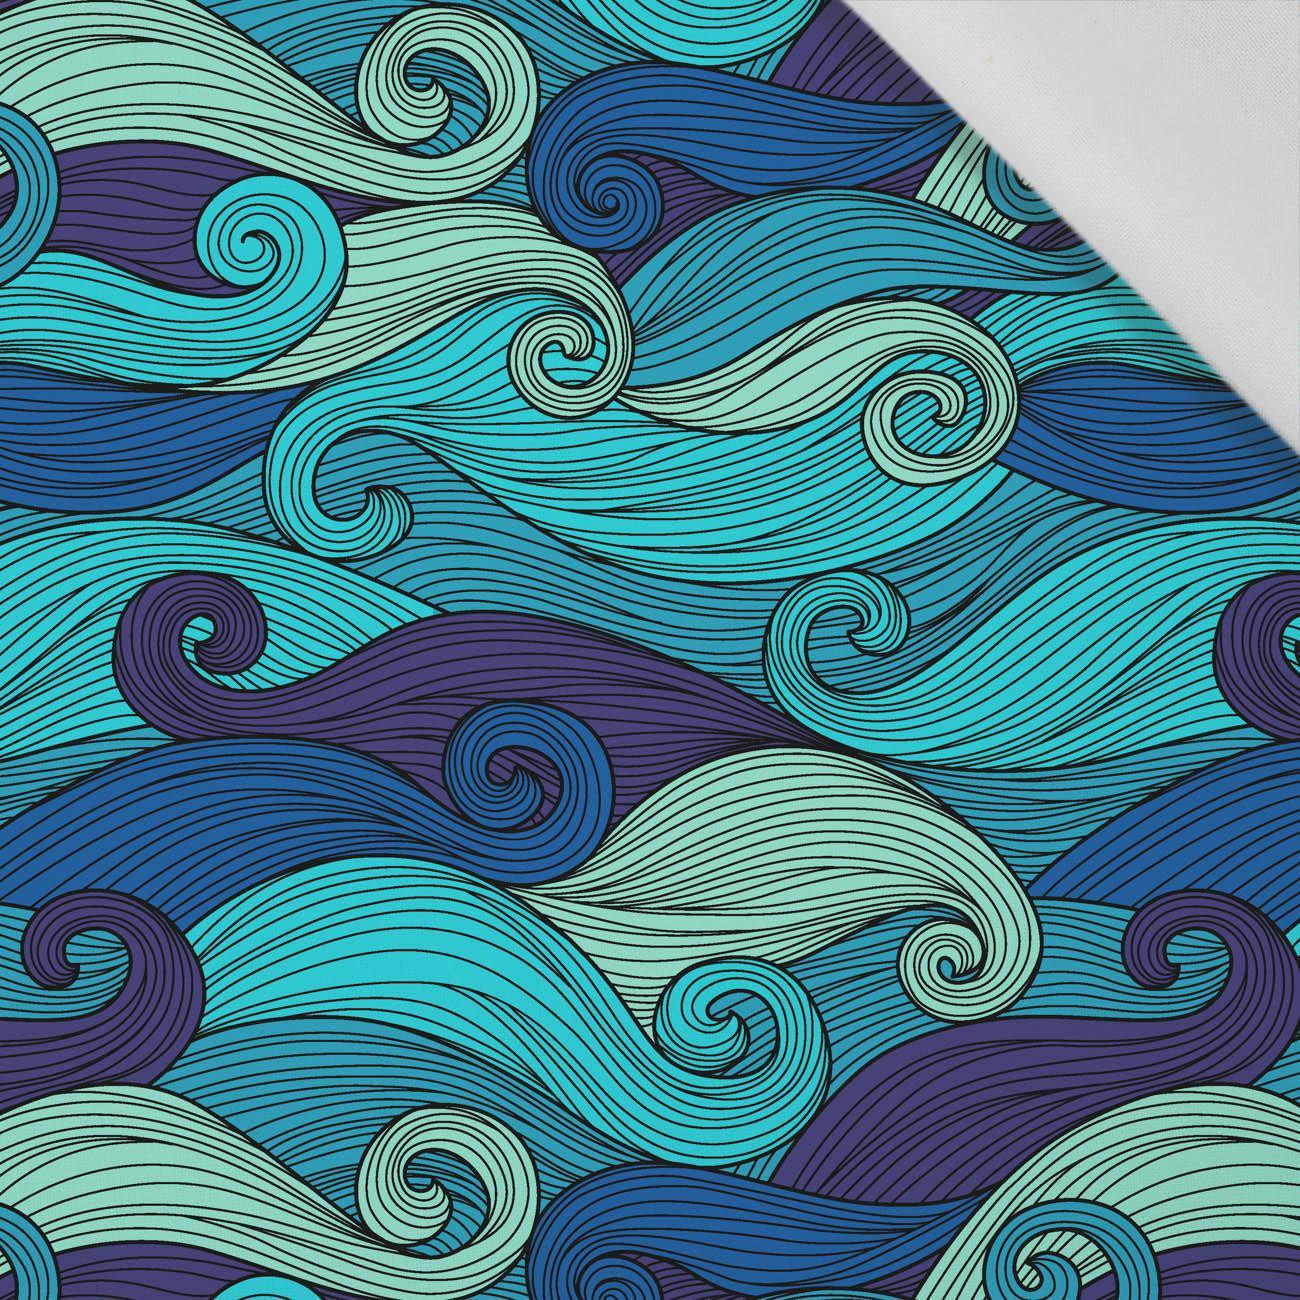 50CM WAVES - Cotton woven fabric